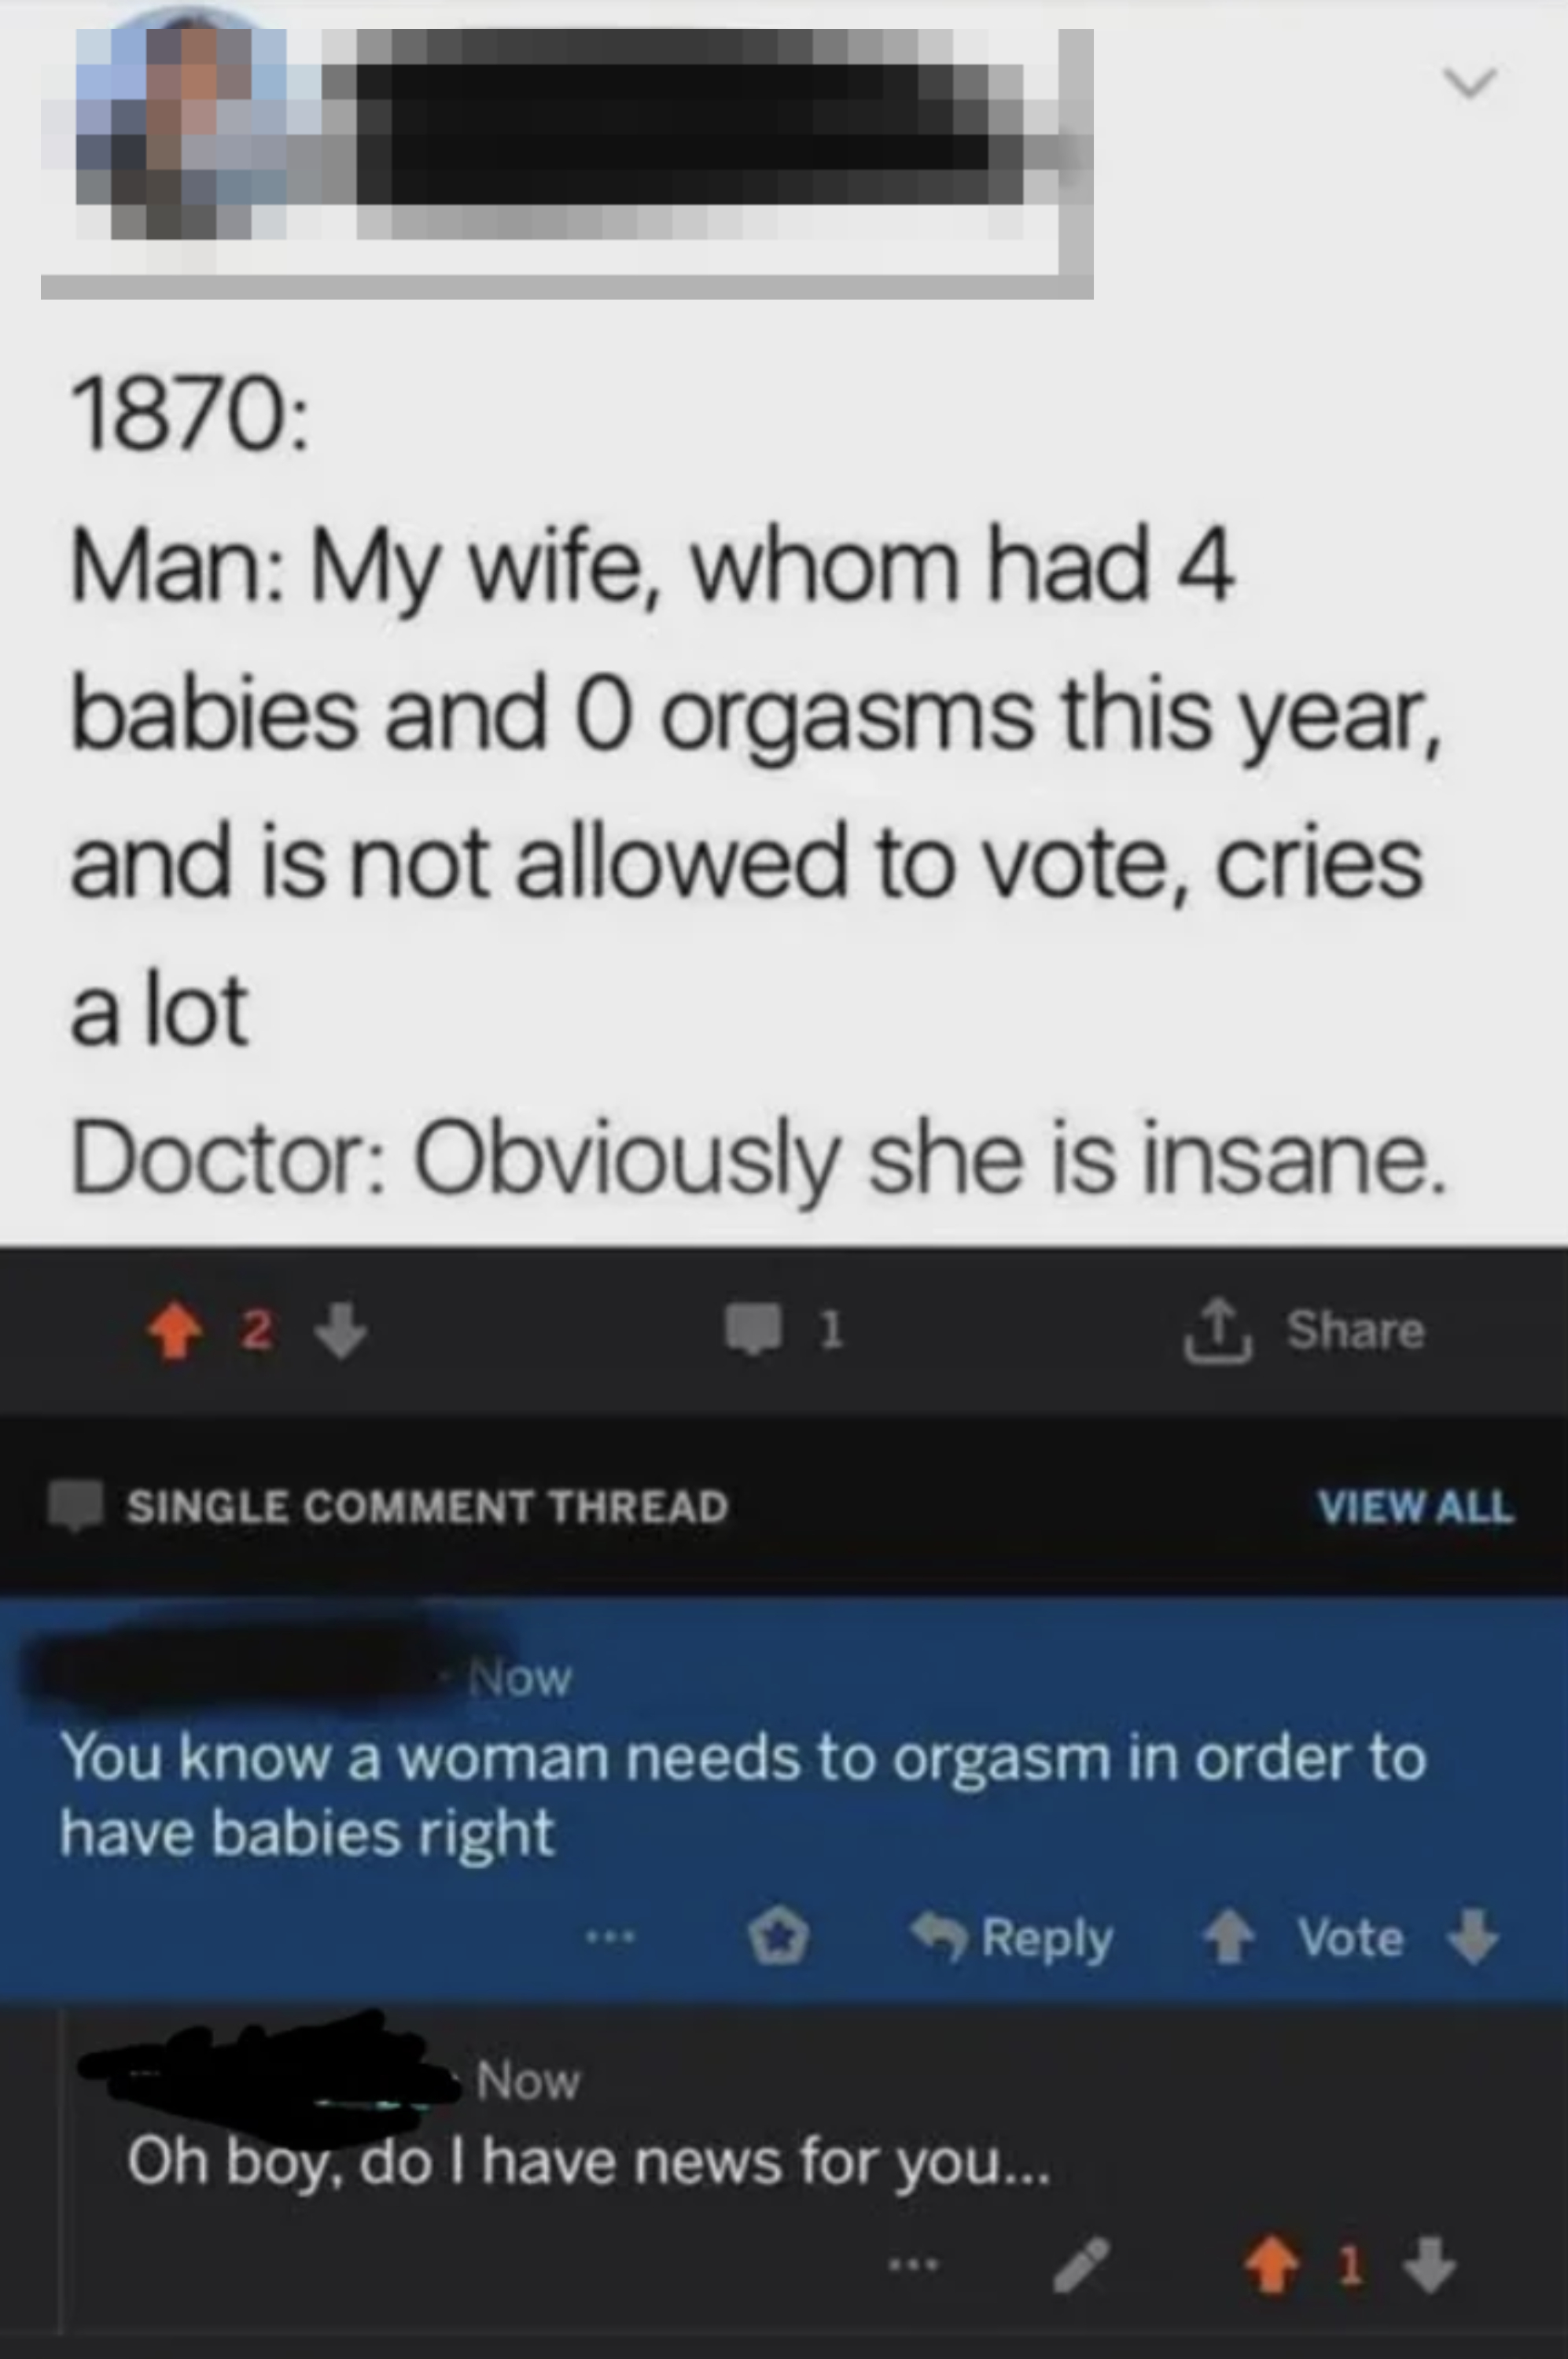 &quot;1870: Man: My wife who had 4 babies and 0 orgasms this year and is not allowed to vote, cries a lot&quot;; doctor: Obviously she is insane&quot;; Comment: You know a woman needs to orgasm in order to have babies, right?&quot;